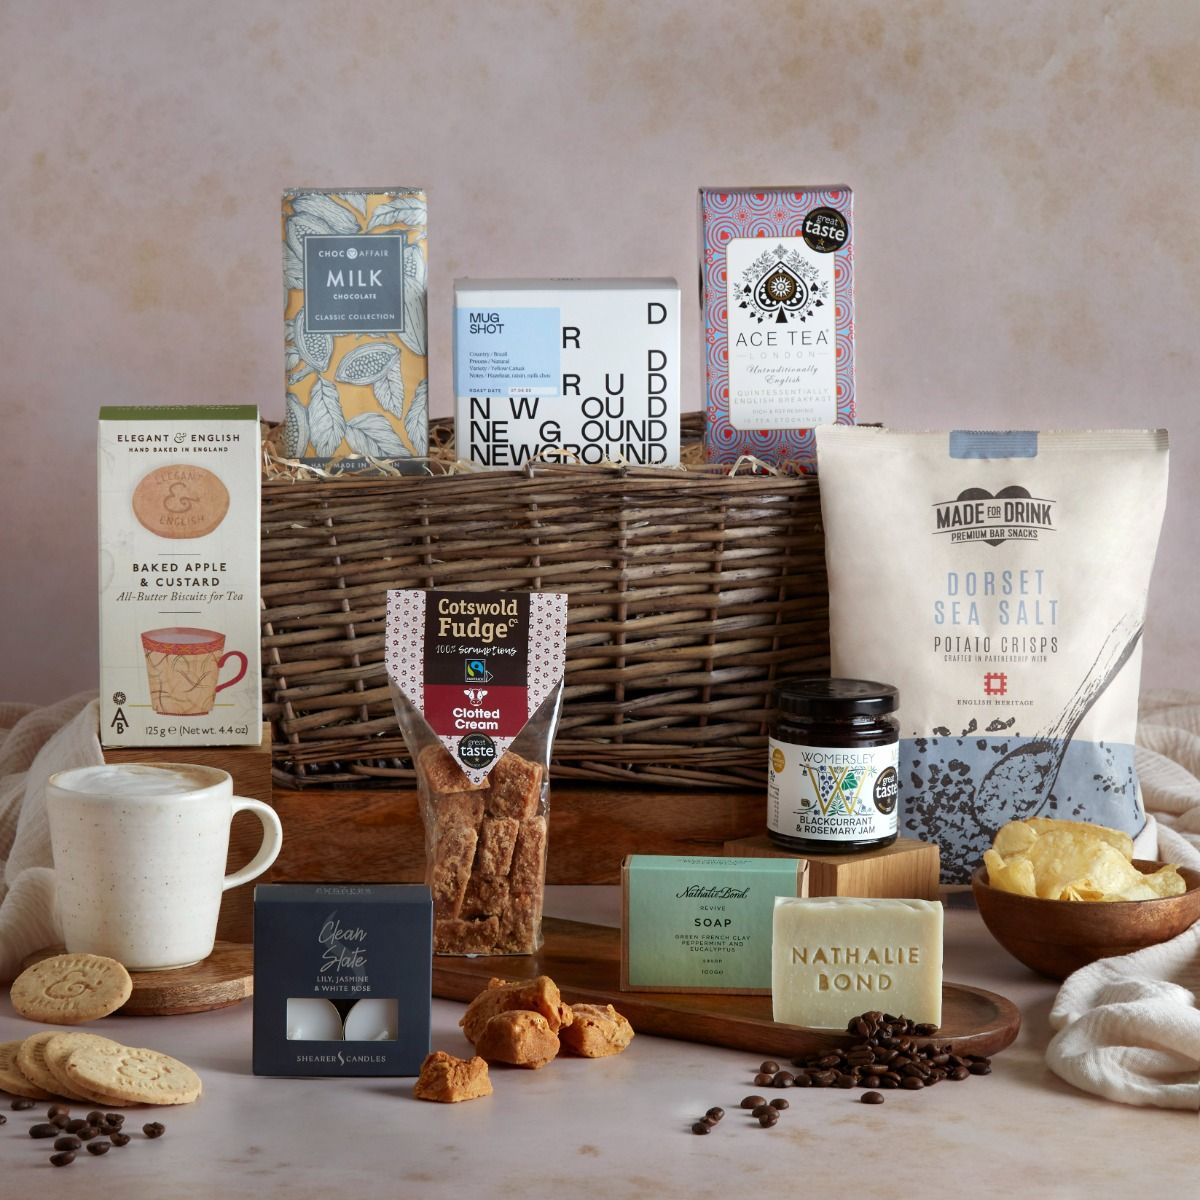 The Aspire Charity Hamper with contents on display